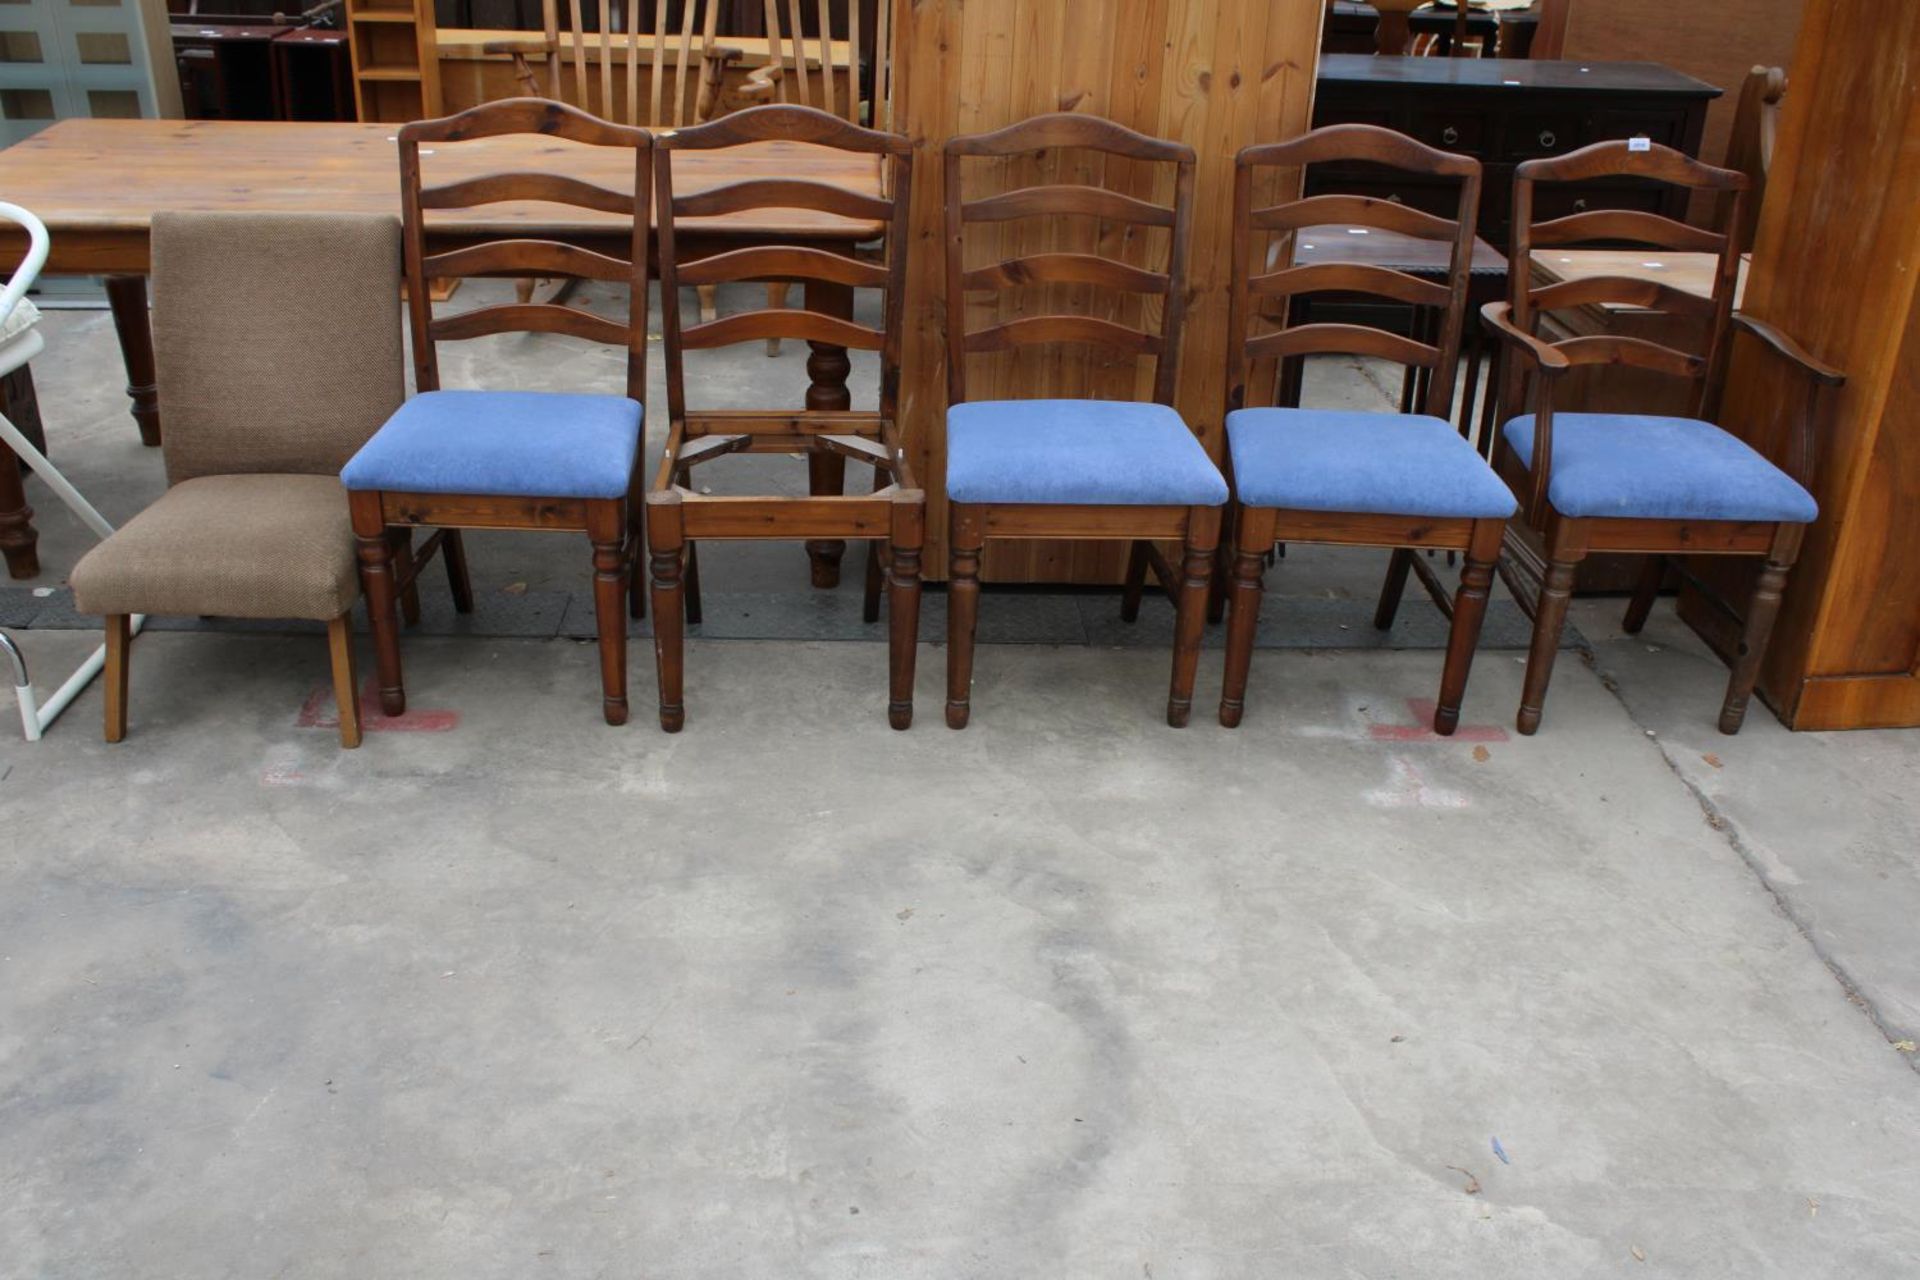 FIVE MODERN LADDER-BACK DINING CHAIRS, ONE BEING A CARVER AND BEDROOM CHAIR